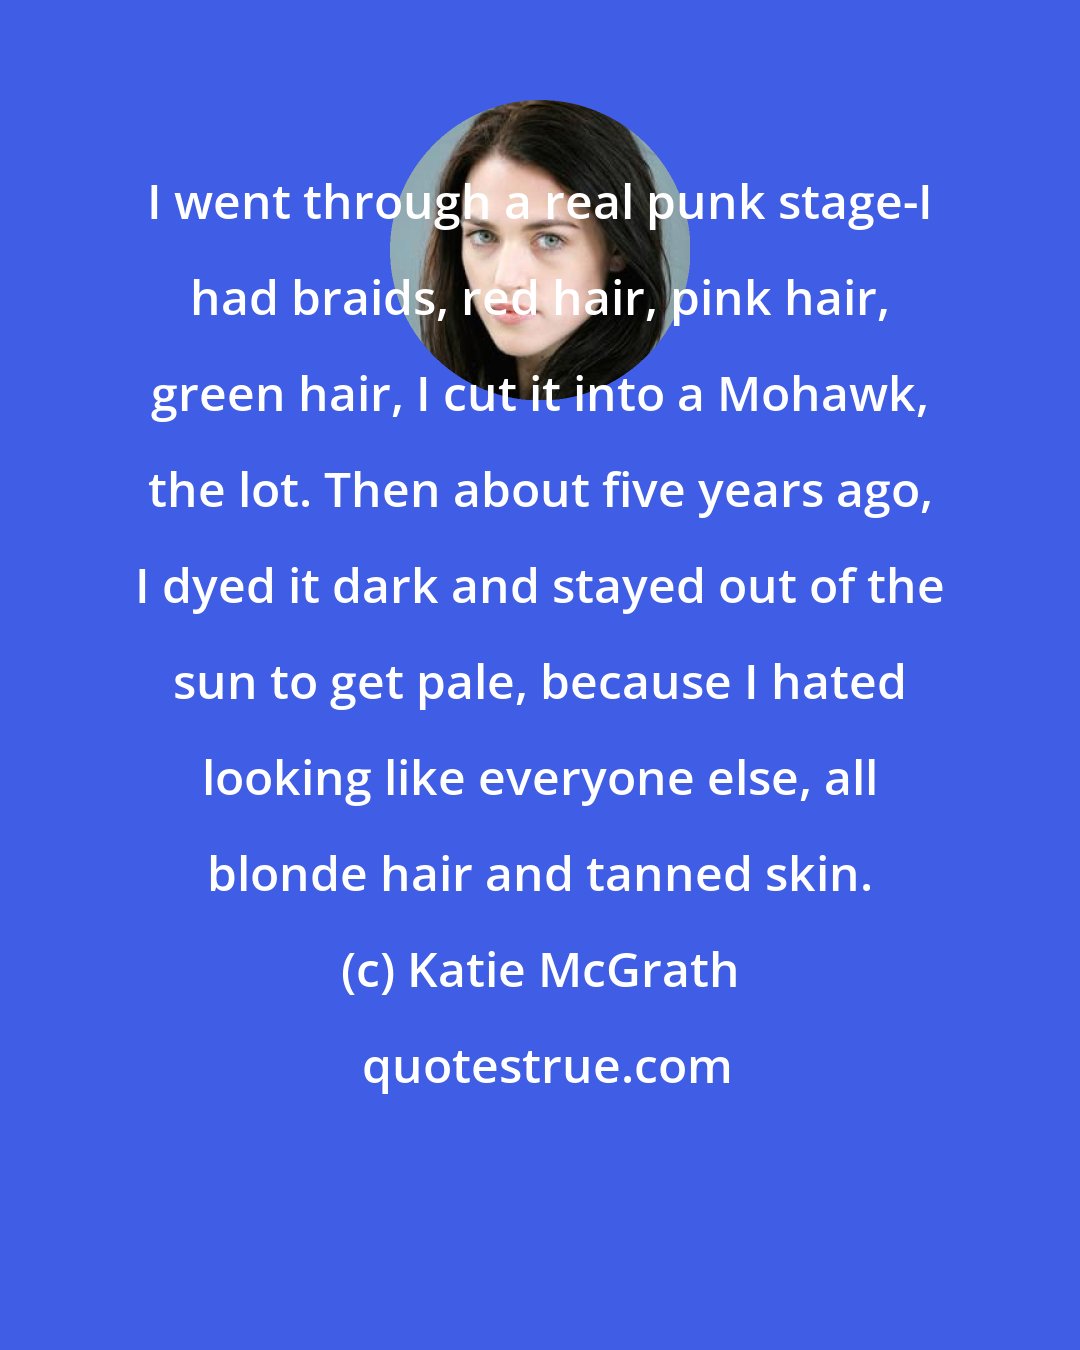 Katie McGrath: I went through a real punk stage-I had braids, red hair, pink hair, green hair, I cut it into a Mohawk, the lot. Then about five years ago, I dyed it dark and stayed out of the sun to get pale, because I hated looking like everyone else, all blonde hair and tanned skin.